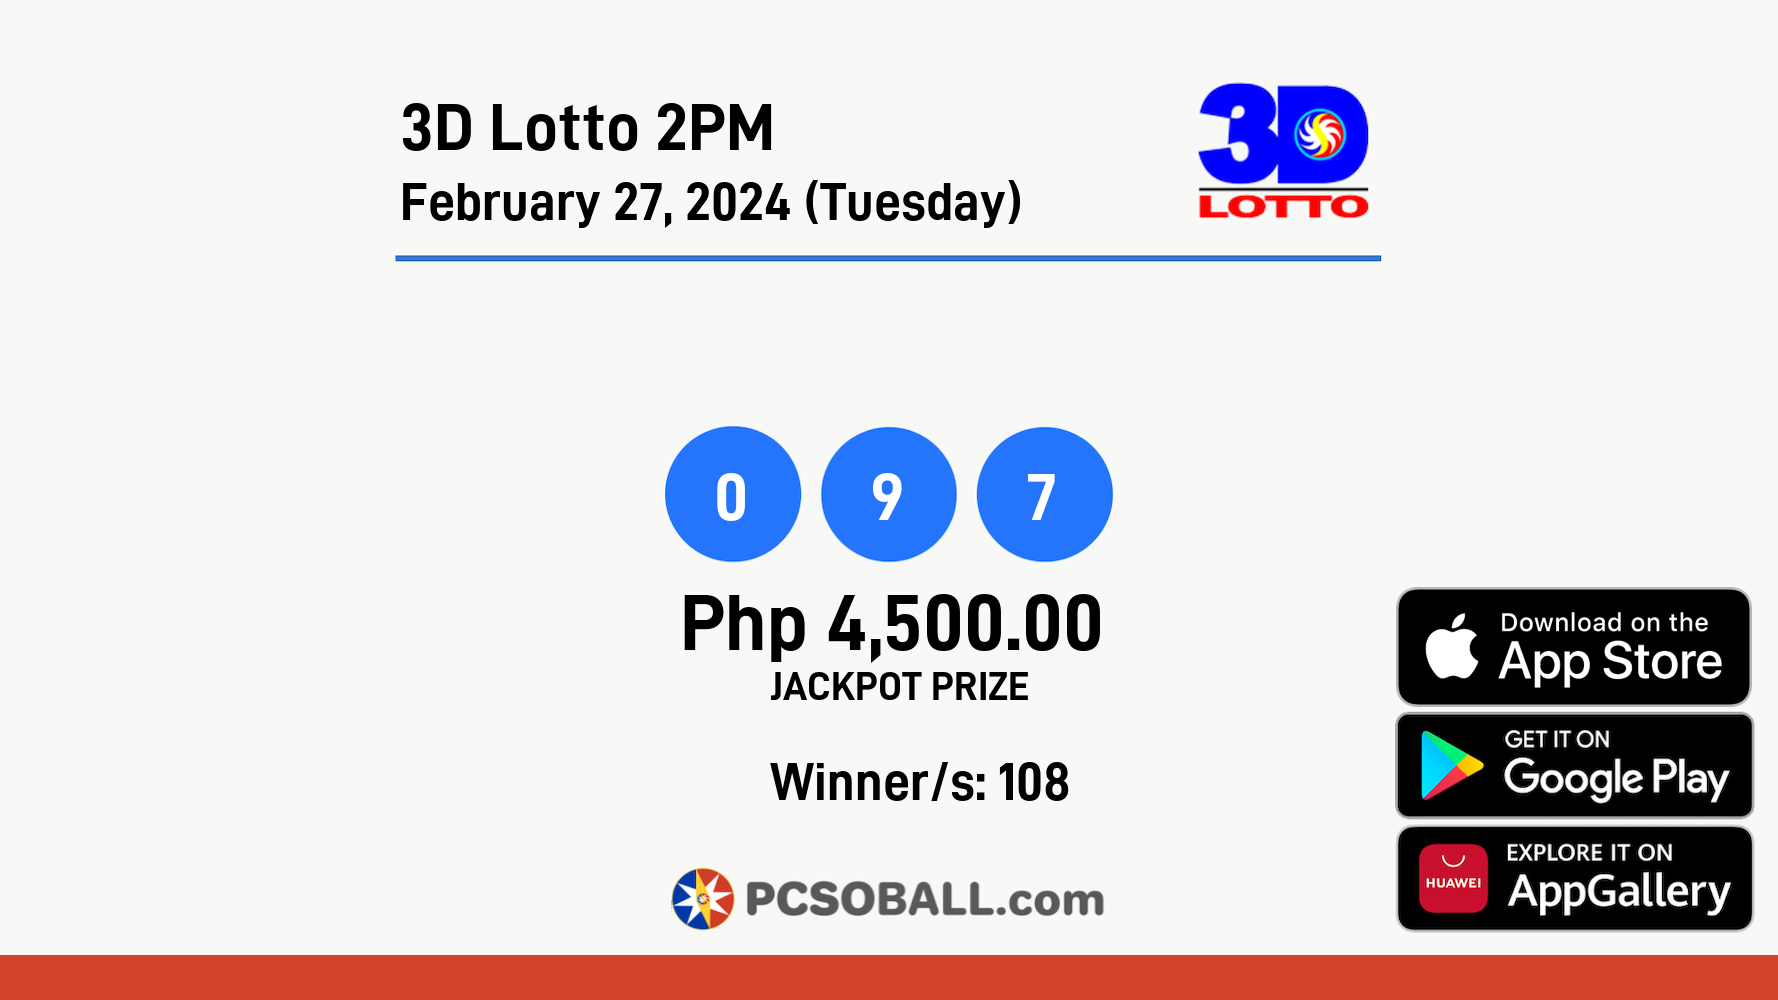 3D Lotto 2PM February 27, 2024 (Tuesday) Result